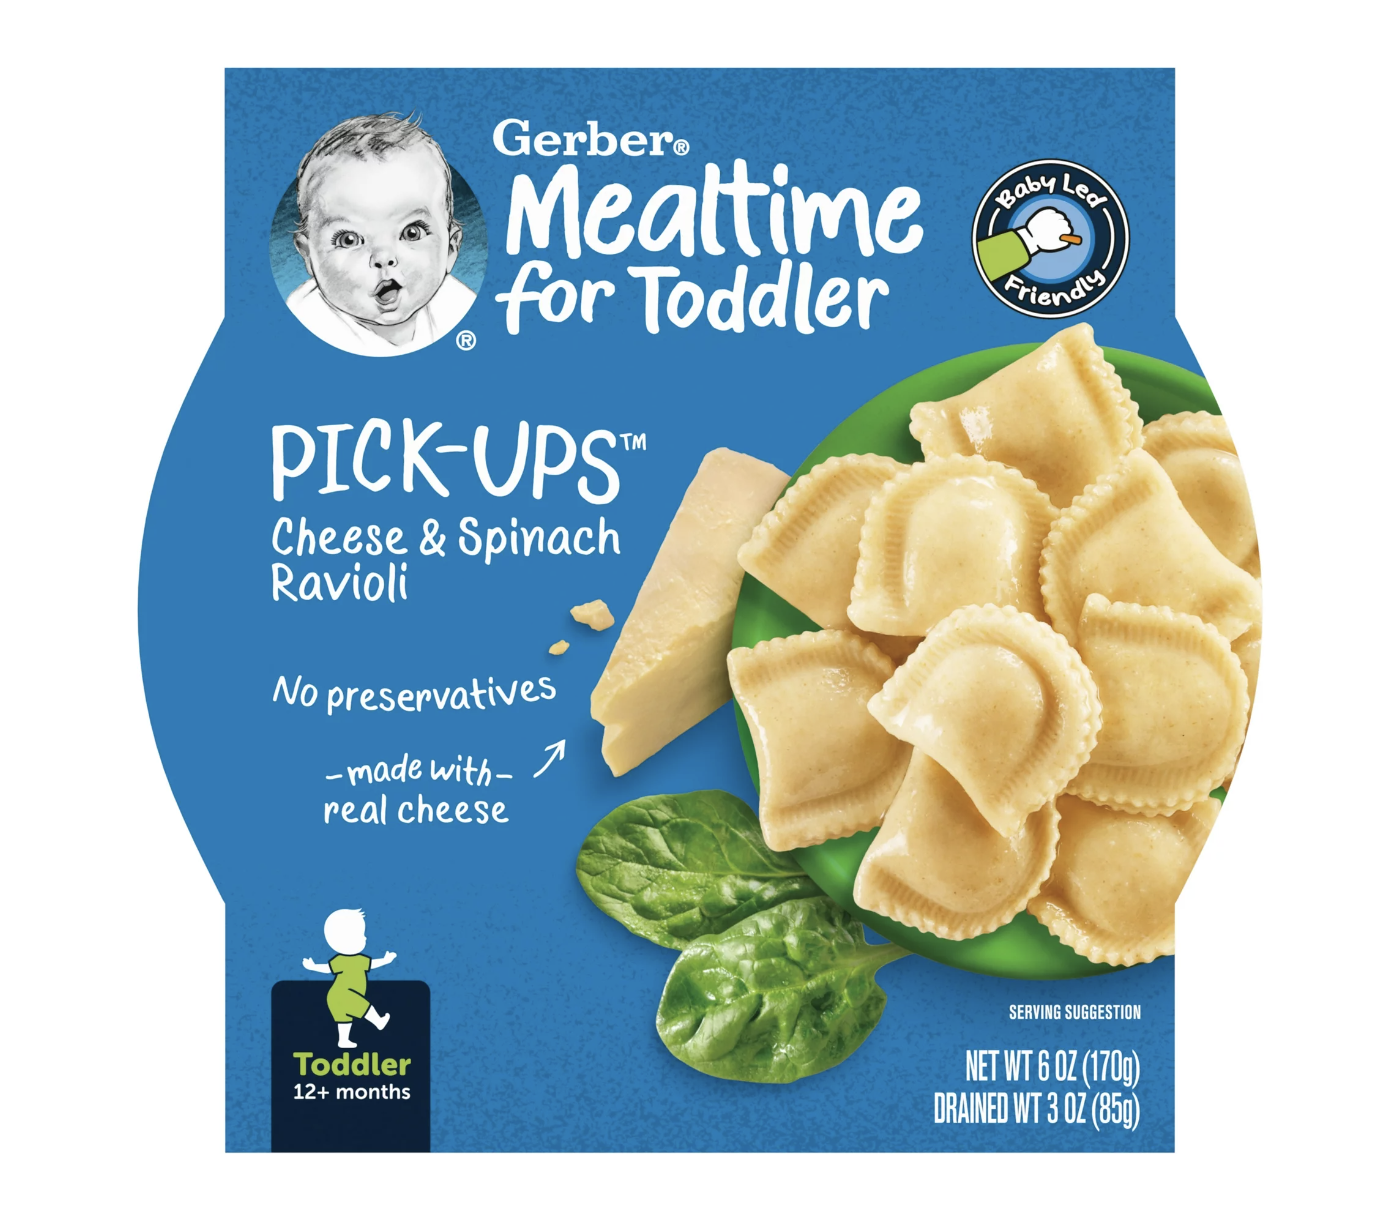 Gerber mealtime for toddlers with no preservatives and real cheese